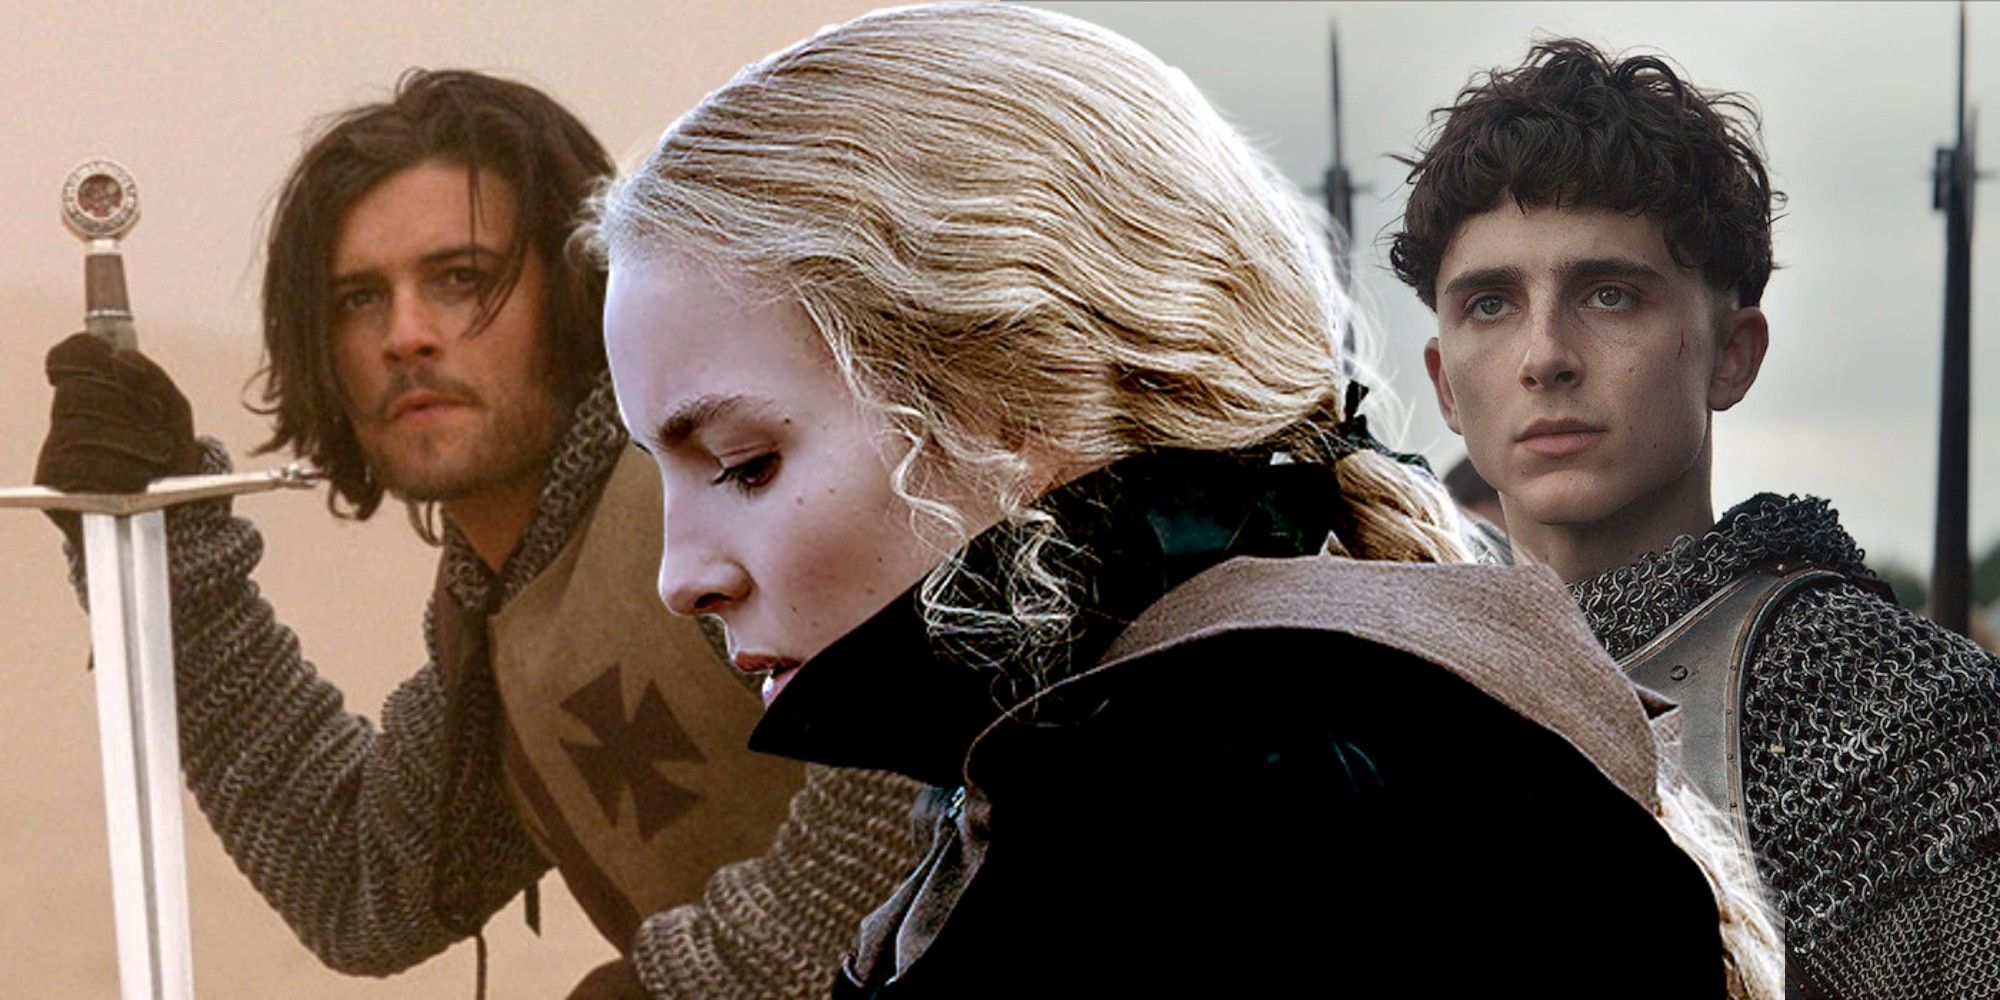 Split image of Orlando Bloom in Kingdom of Heaven, Jodie Comer in The Last Duel and Timothee Chalamet in The King